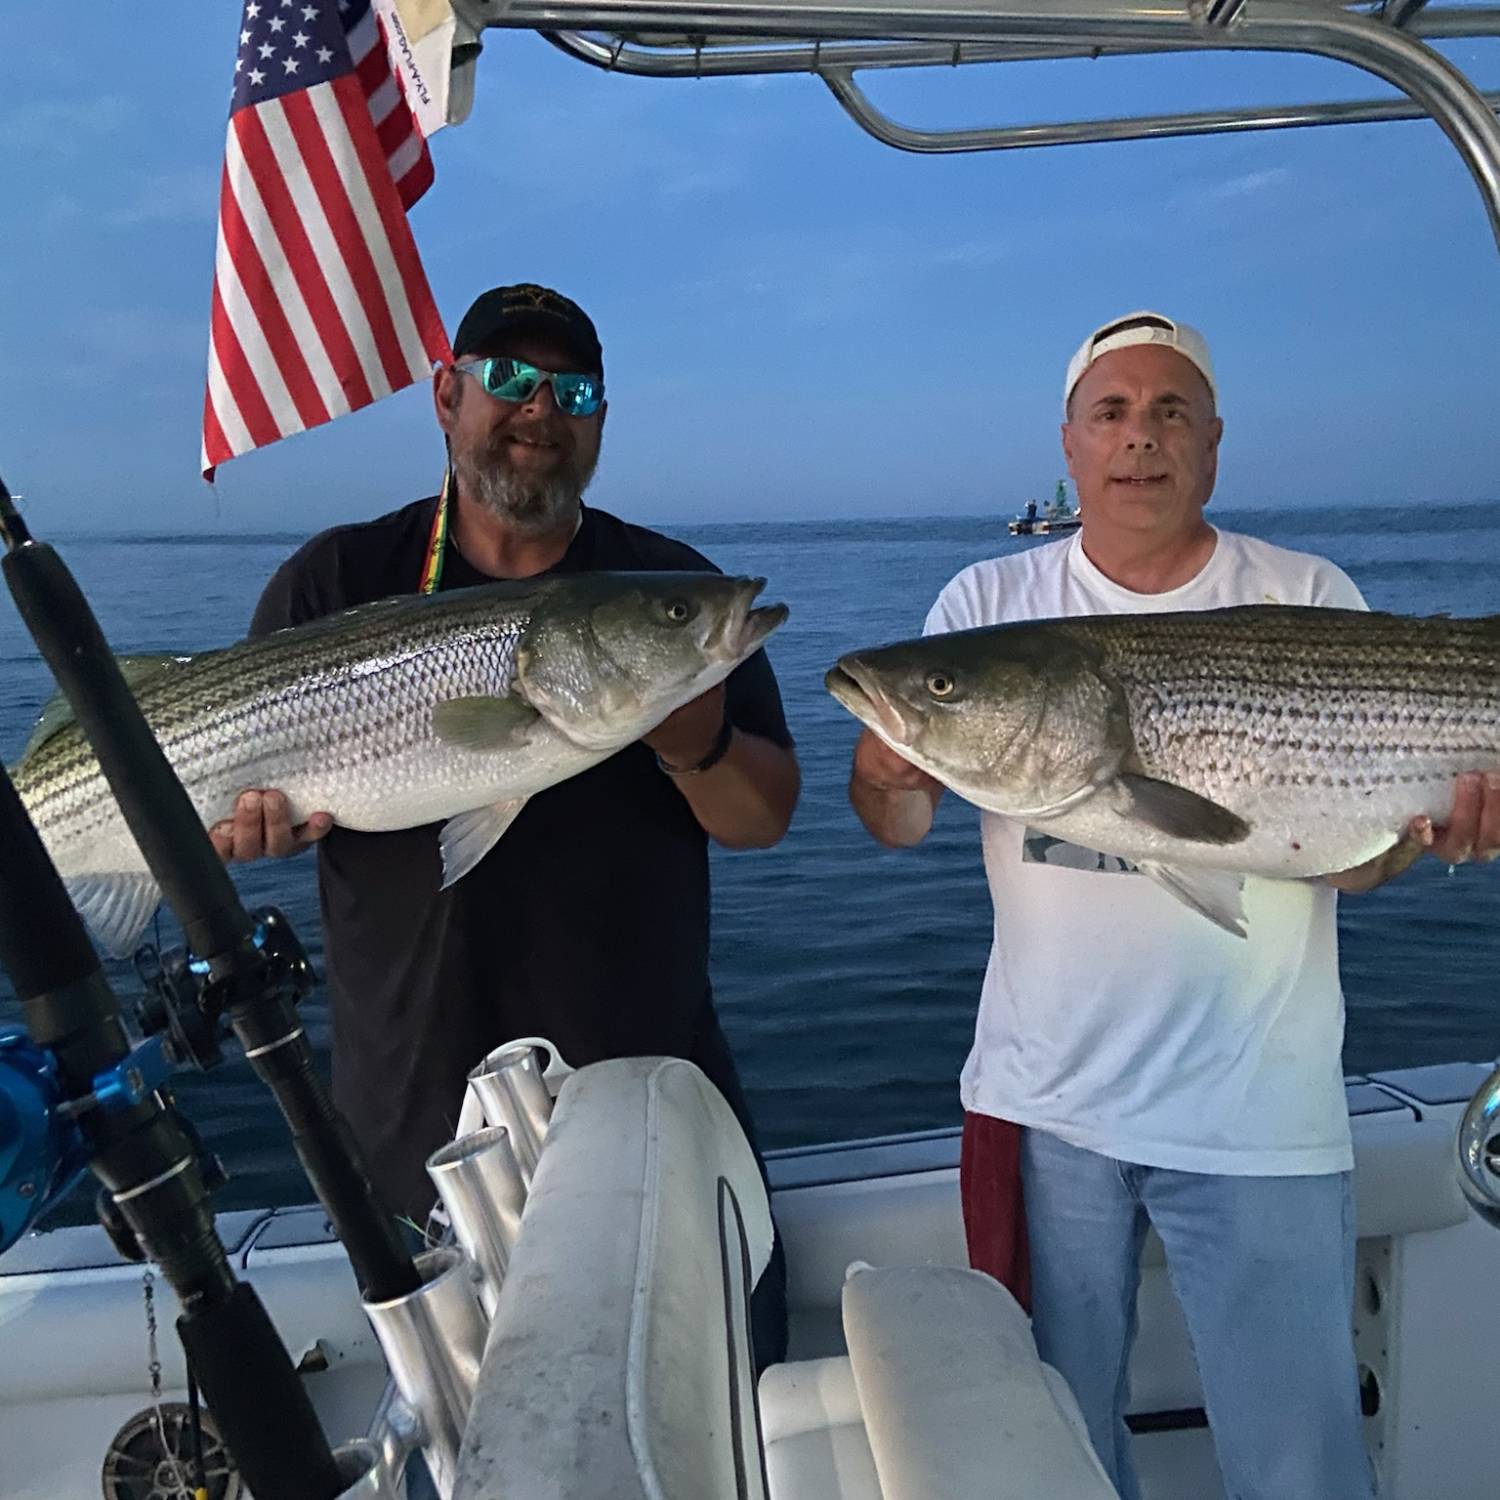 Title: Doubled up! - On board their Sportsman Open 232 Center Console - Location: Eatons Neck New York. Participating in the Photo Contest #SportsmanAugust